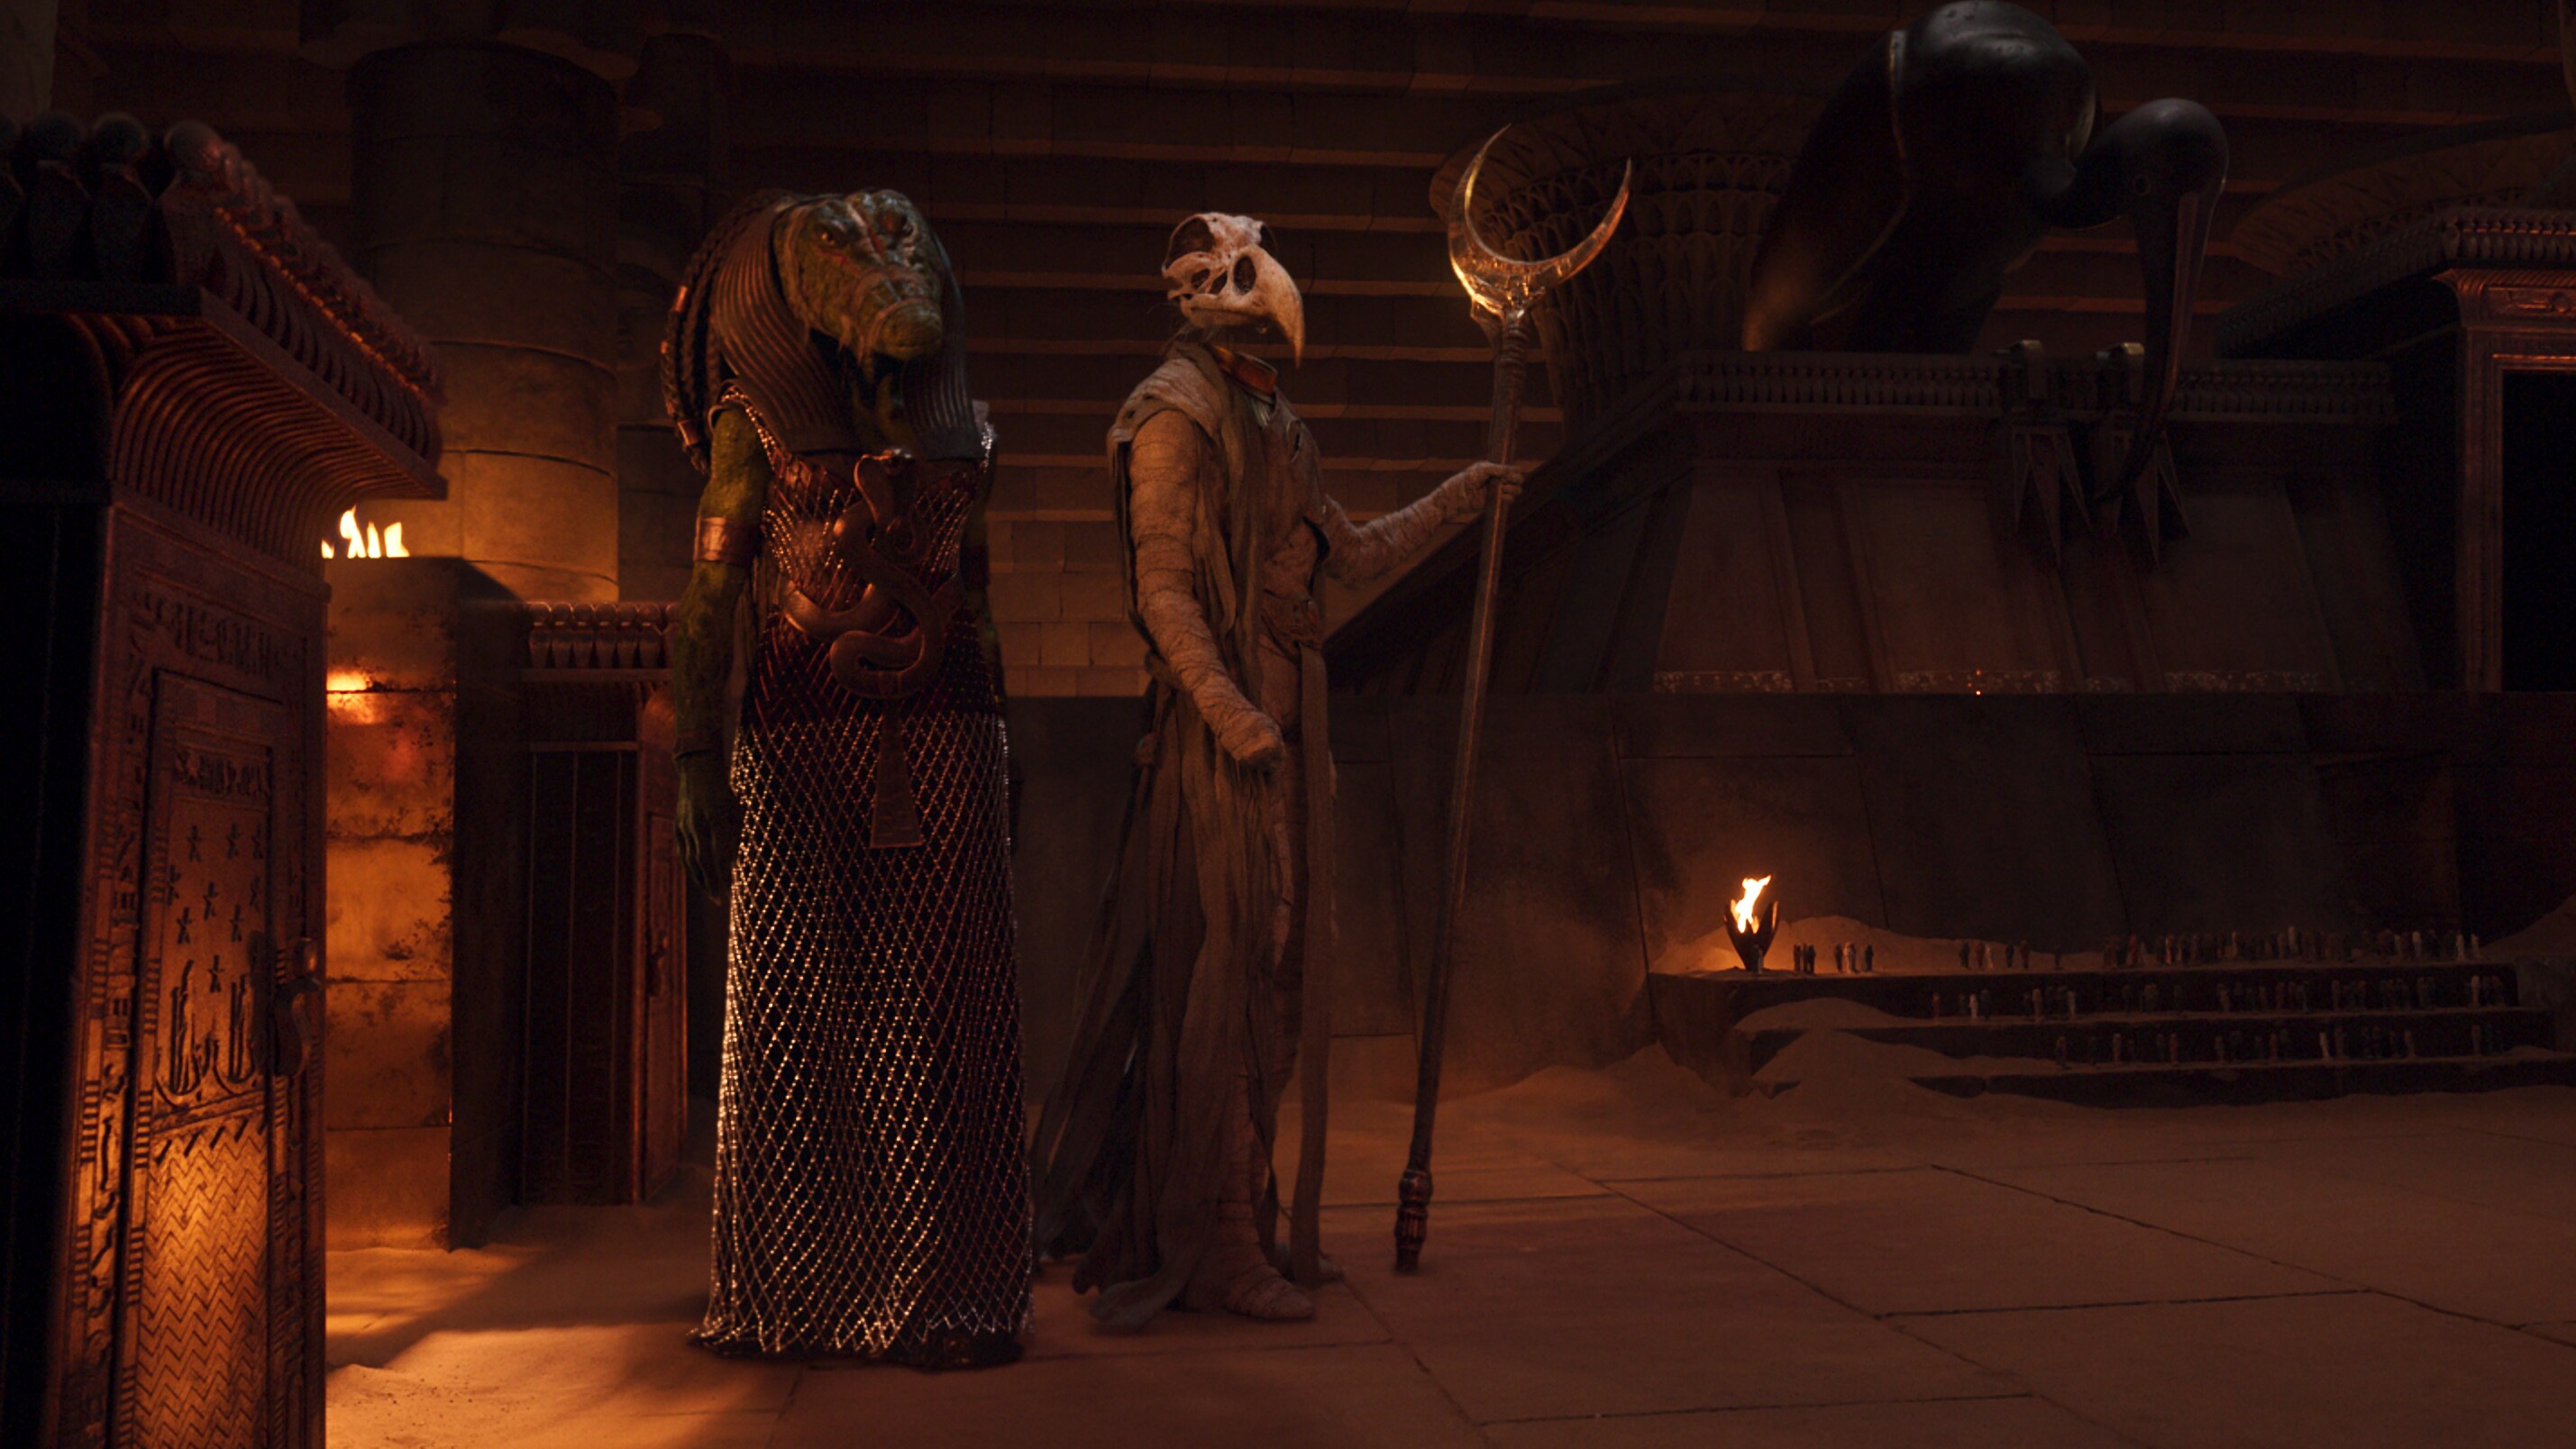 (L-R): Ammit (voiced by Saba Mubarak) and Khonshu (voiced by F. Murray Abraham) in Marvel Studios' MOON KNIGHT., exclusively on Disney+. Photo courtesy of Marvel Studios. ©Marvel Studios 2022. All Rights Reserved.